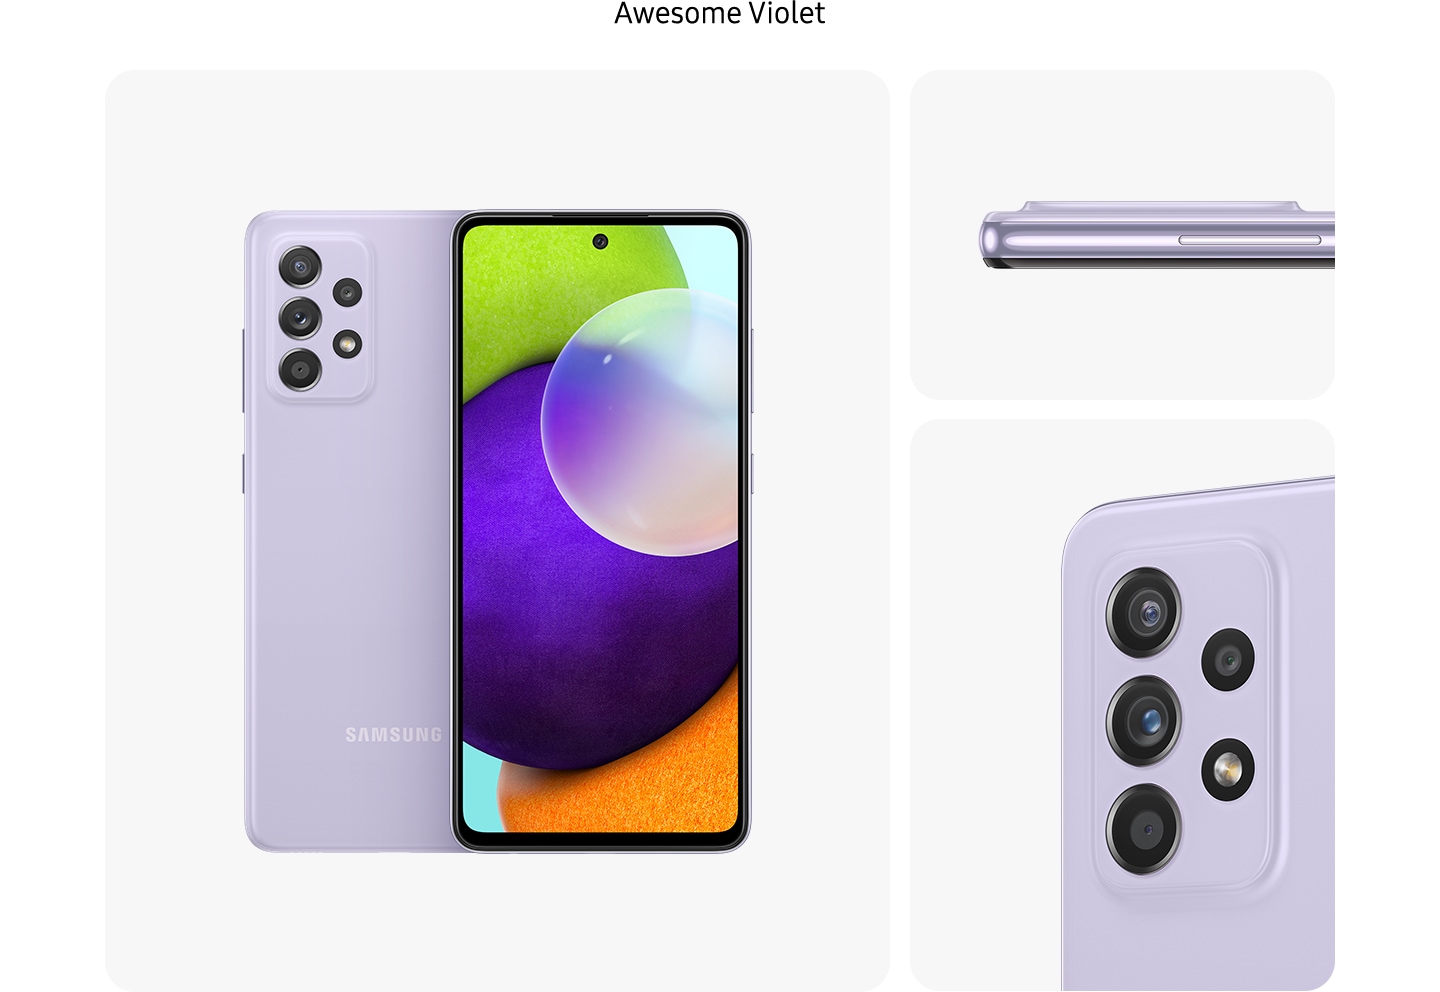 1. VioletGalaxy A52 in Awesome Violet, seen from multiple angles to show the design: rear, front, side and close-up on the rear camera.